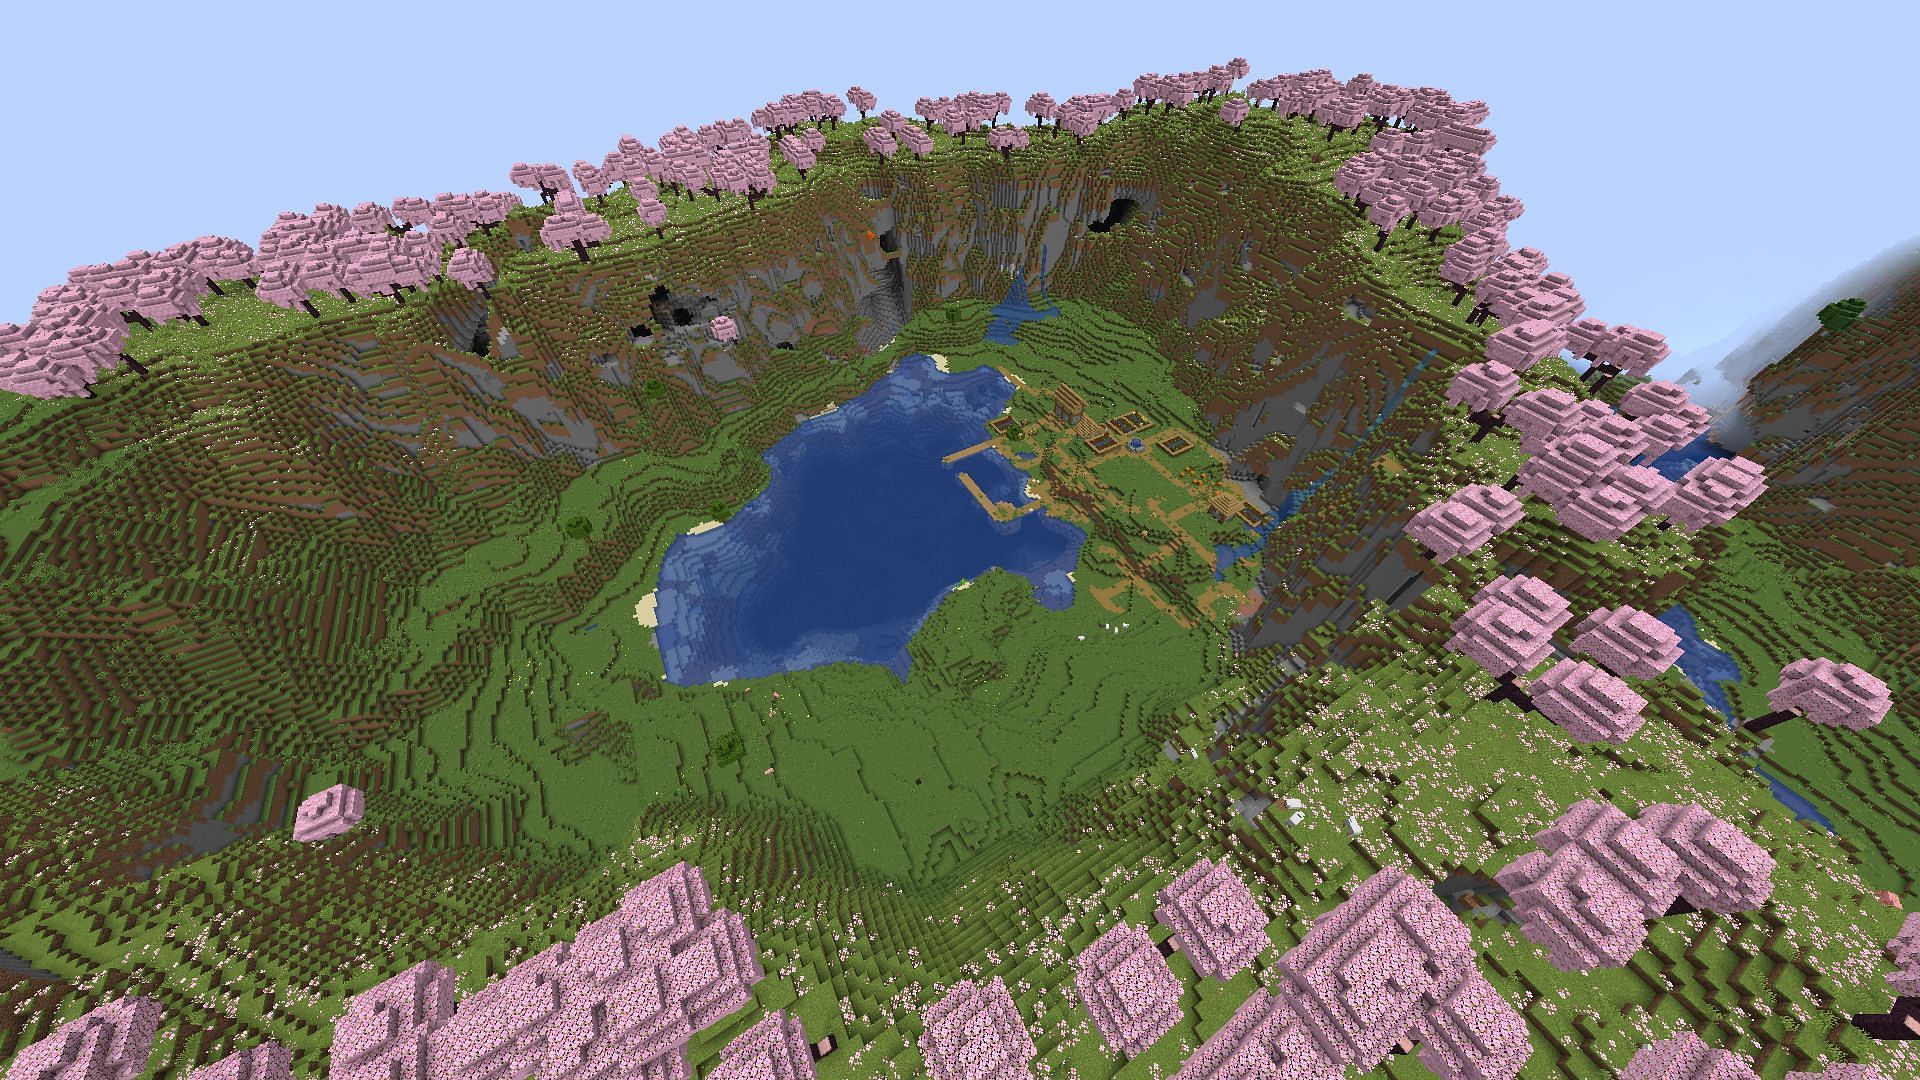 Cherry Grove completely surrounds a plains village in Minecraft 1.20.1 (Image via Mojang)